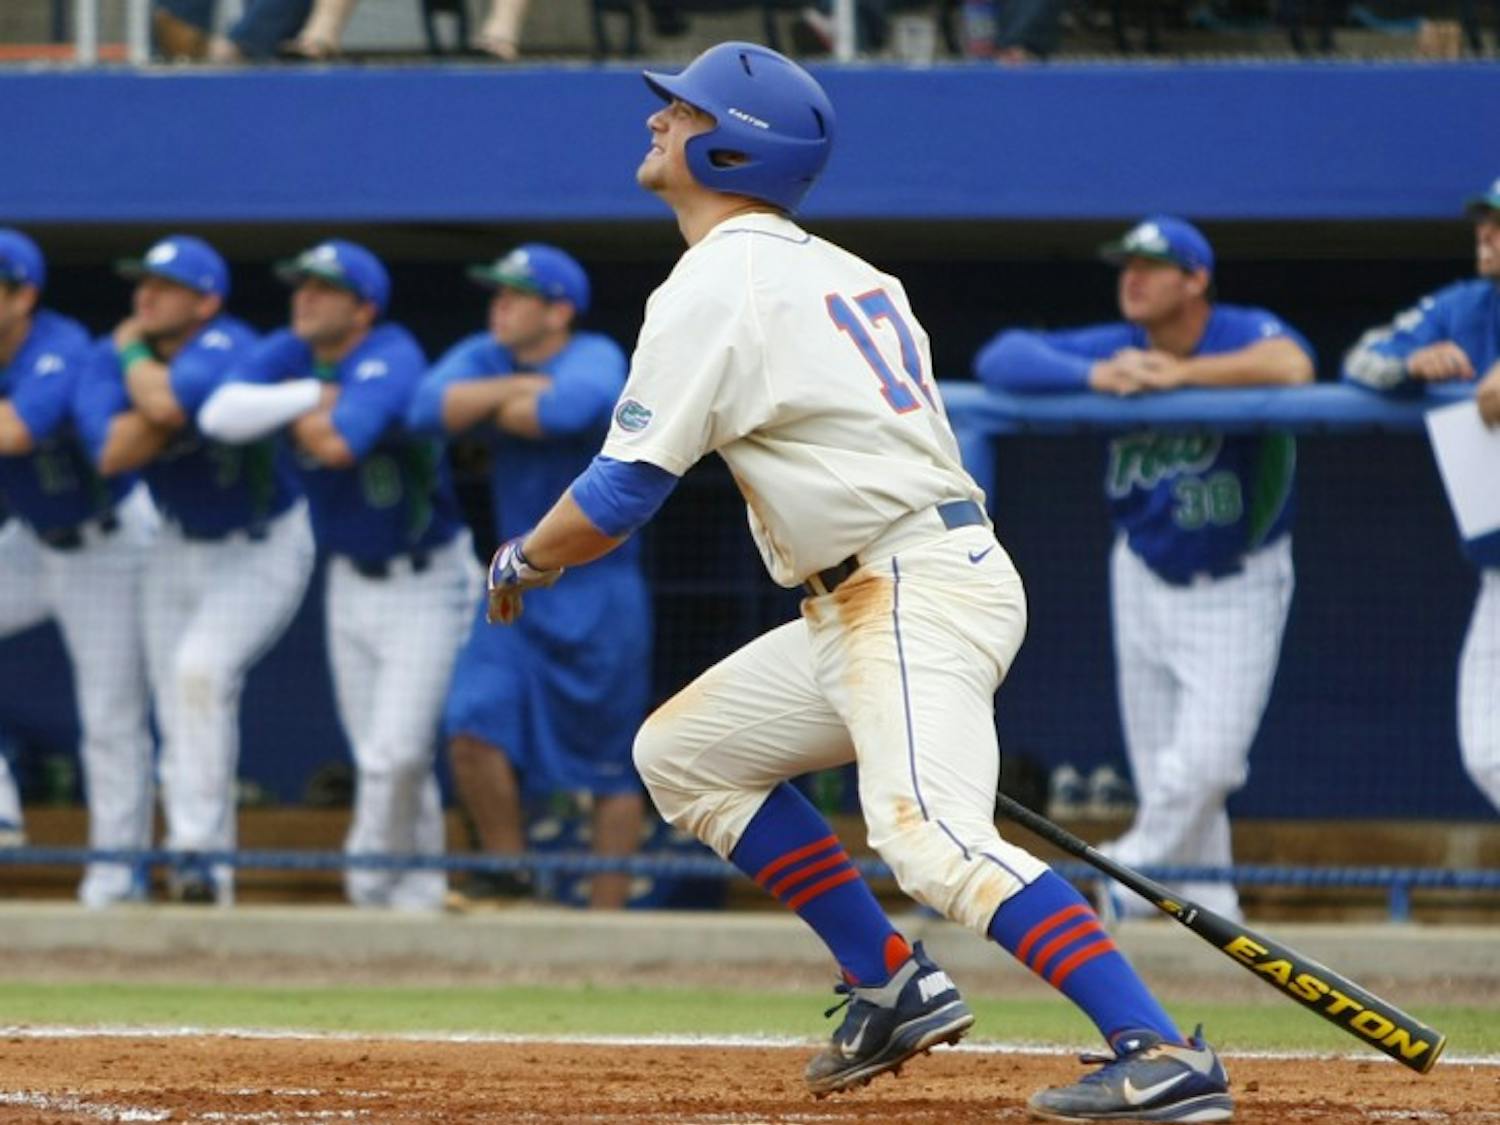 Gushue's go-ahead home run in the bottom of the seventh inning Sunday helped UF wrap up a three-game sweep of FGCU.